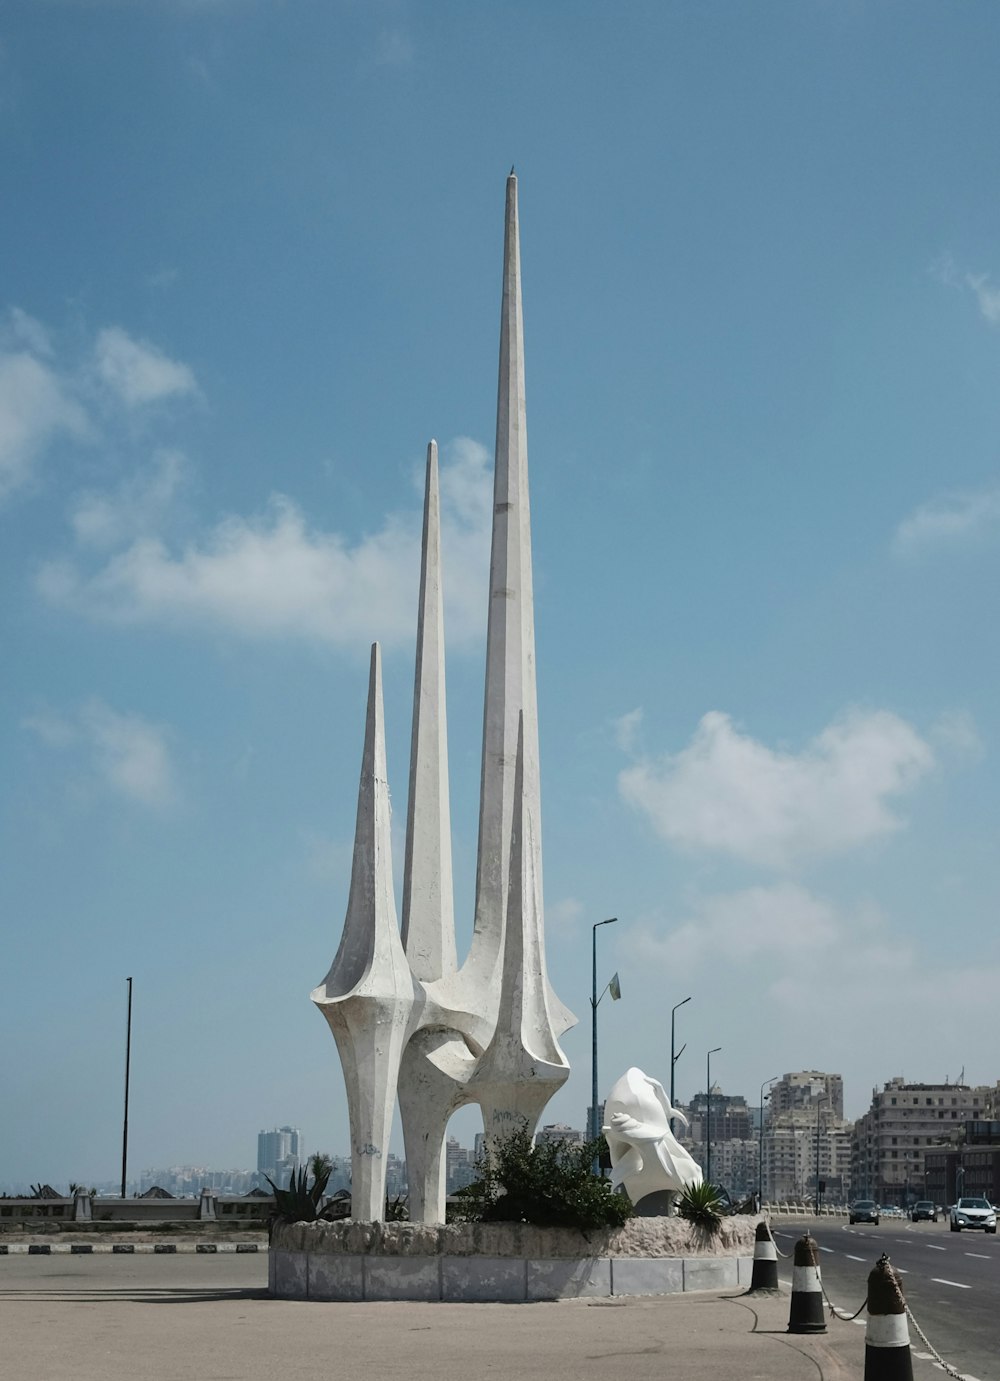 a tall monument in a city